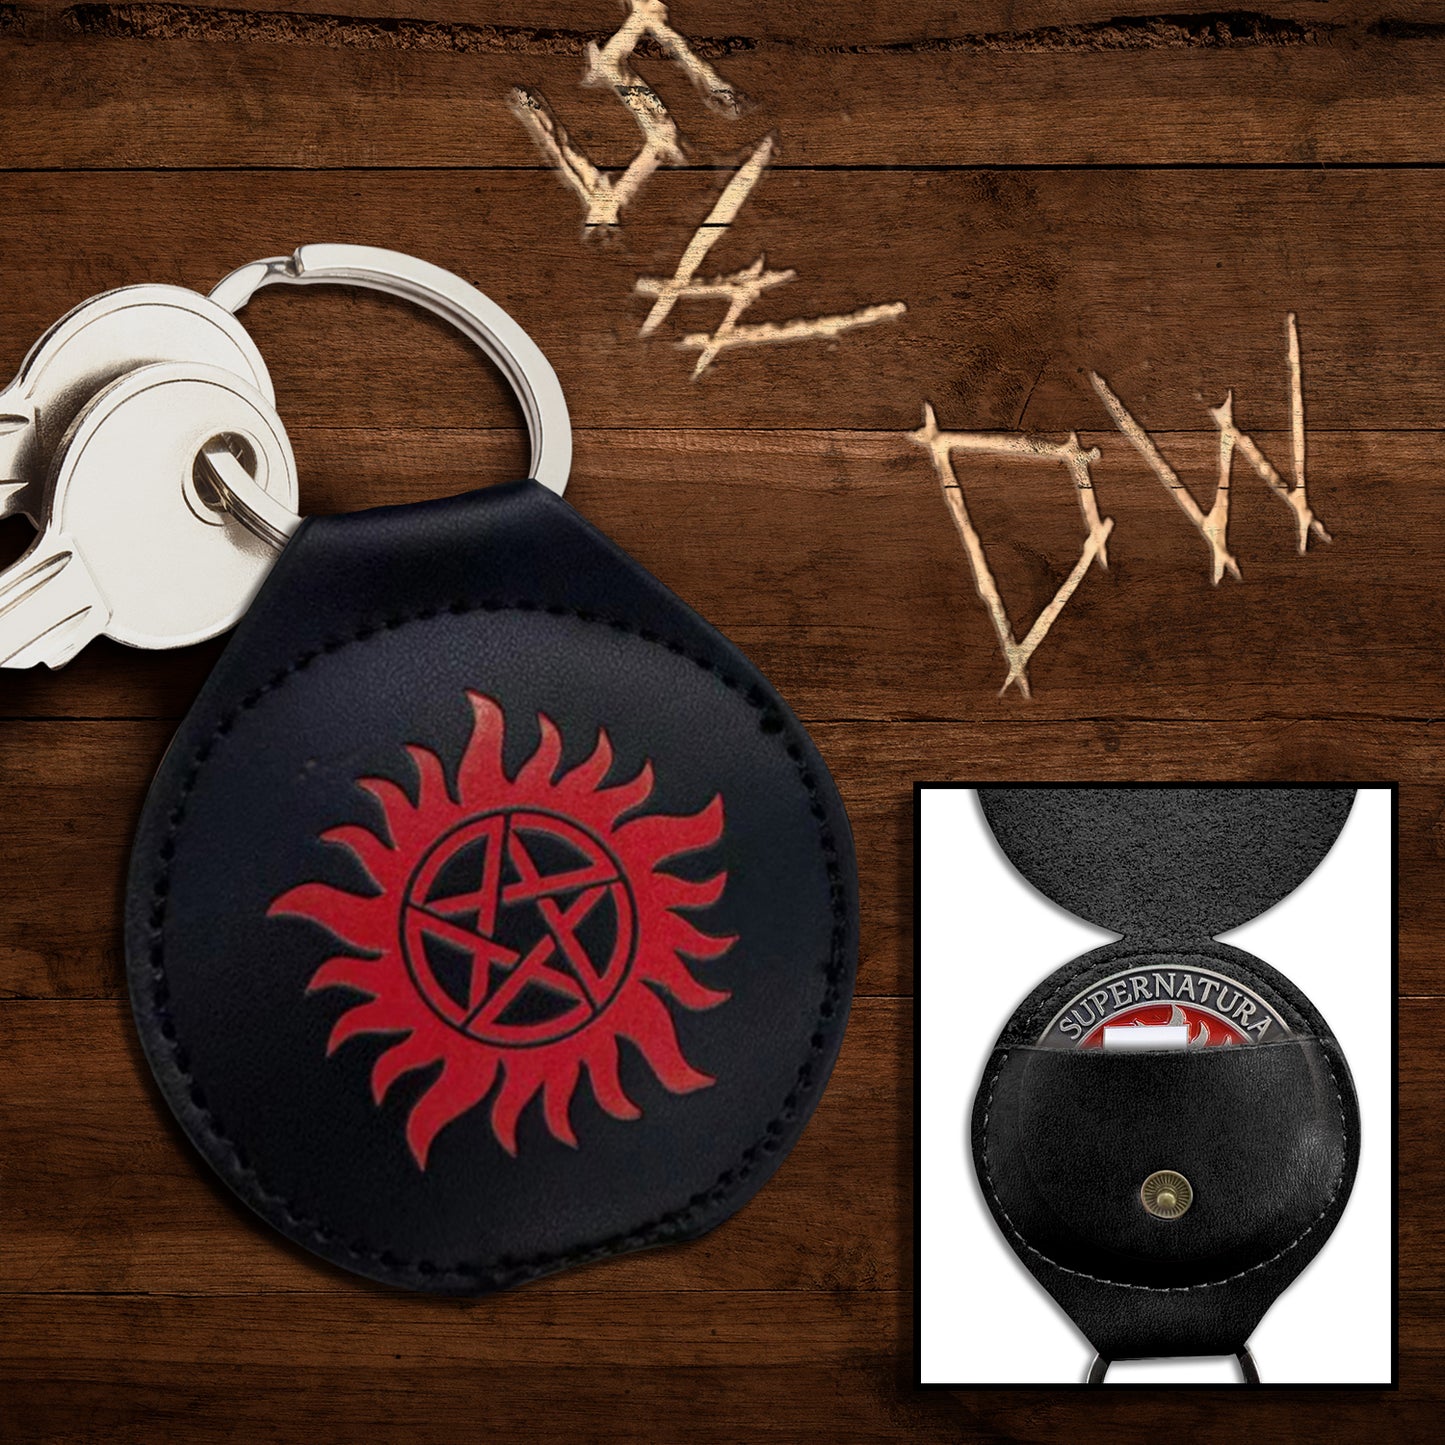 Load image into Gallery viewer, A round, black coin holder with two keys on a key ring at the top. In the center is a red embossed image of a the anti-possession symbol. Behind the holder is a wooden table with the initials SW and DW carved into it. At the bottom right is an inset image of holder opened up with a Challenge Coin inside.
